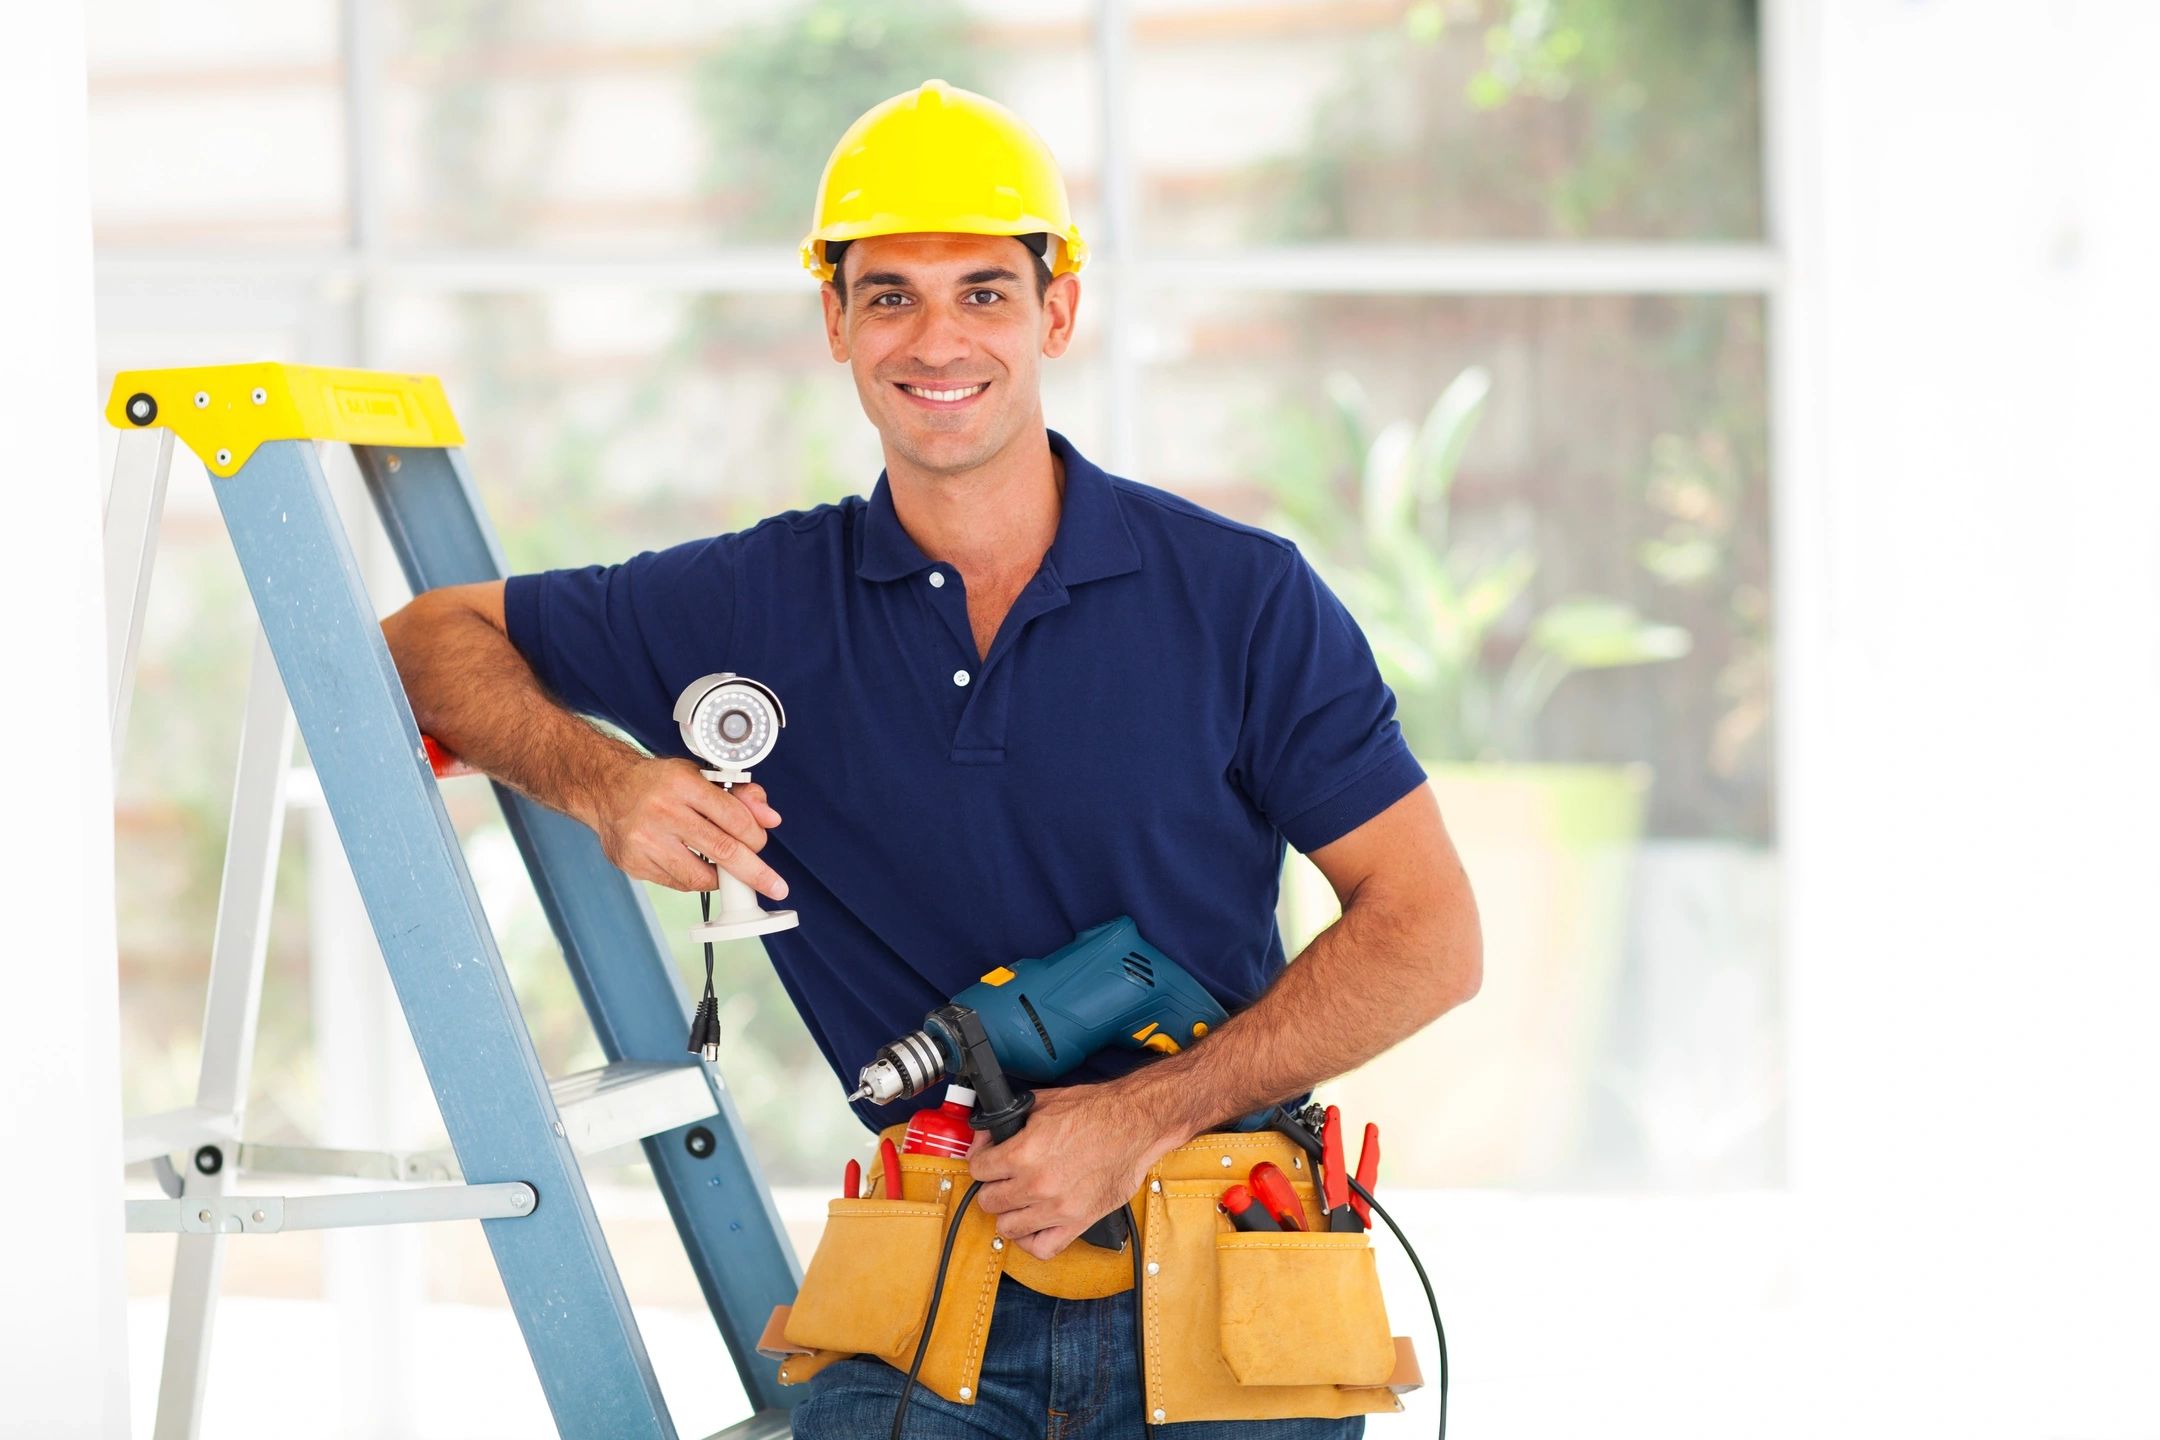 Find a professional electrician you can trust